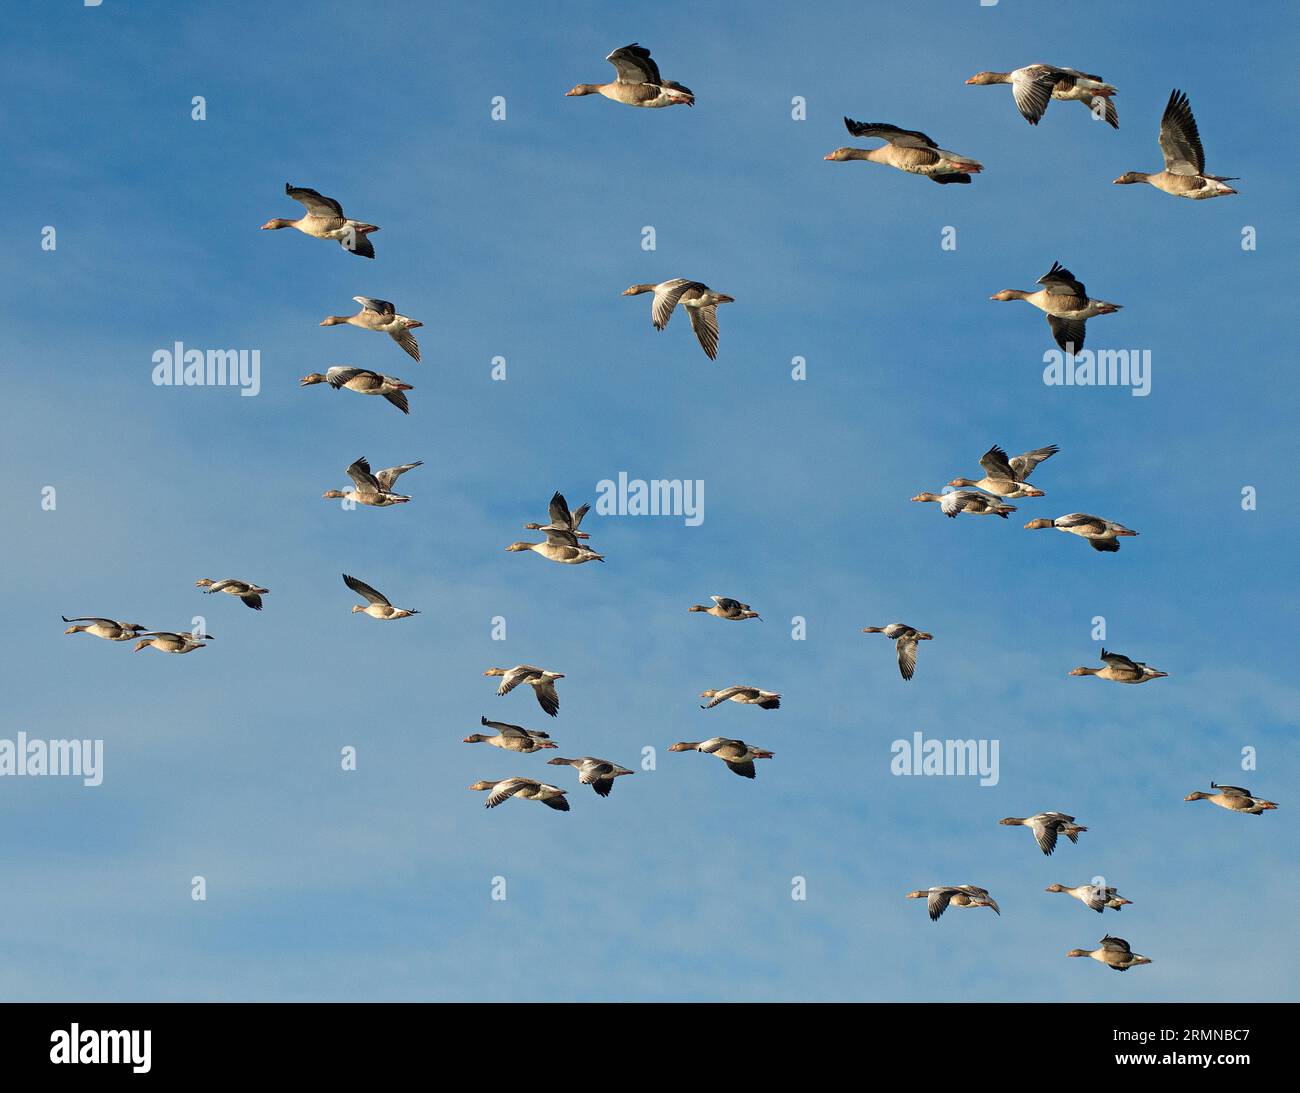 Colour image of large flock of Greylag Geese attractively lit by the sun and seen from below against a pale blue sky Stock Photo